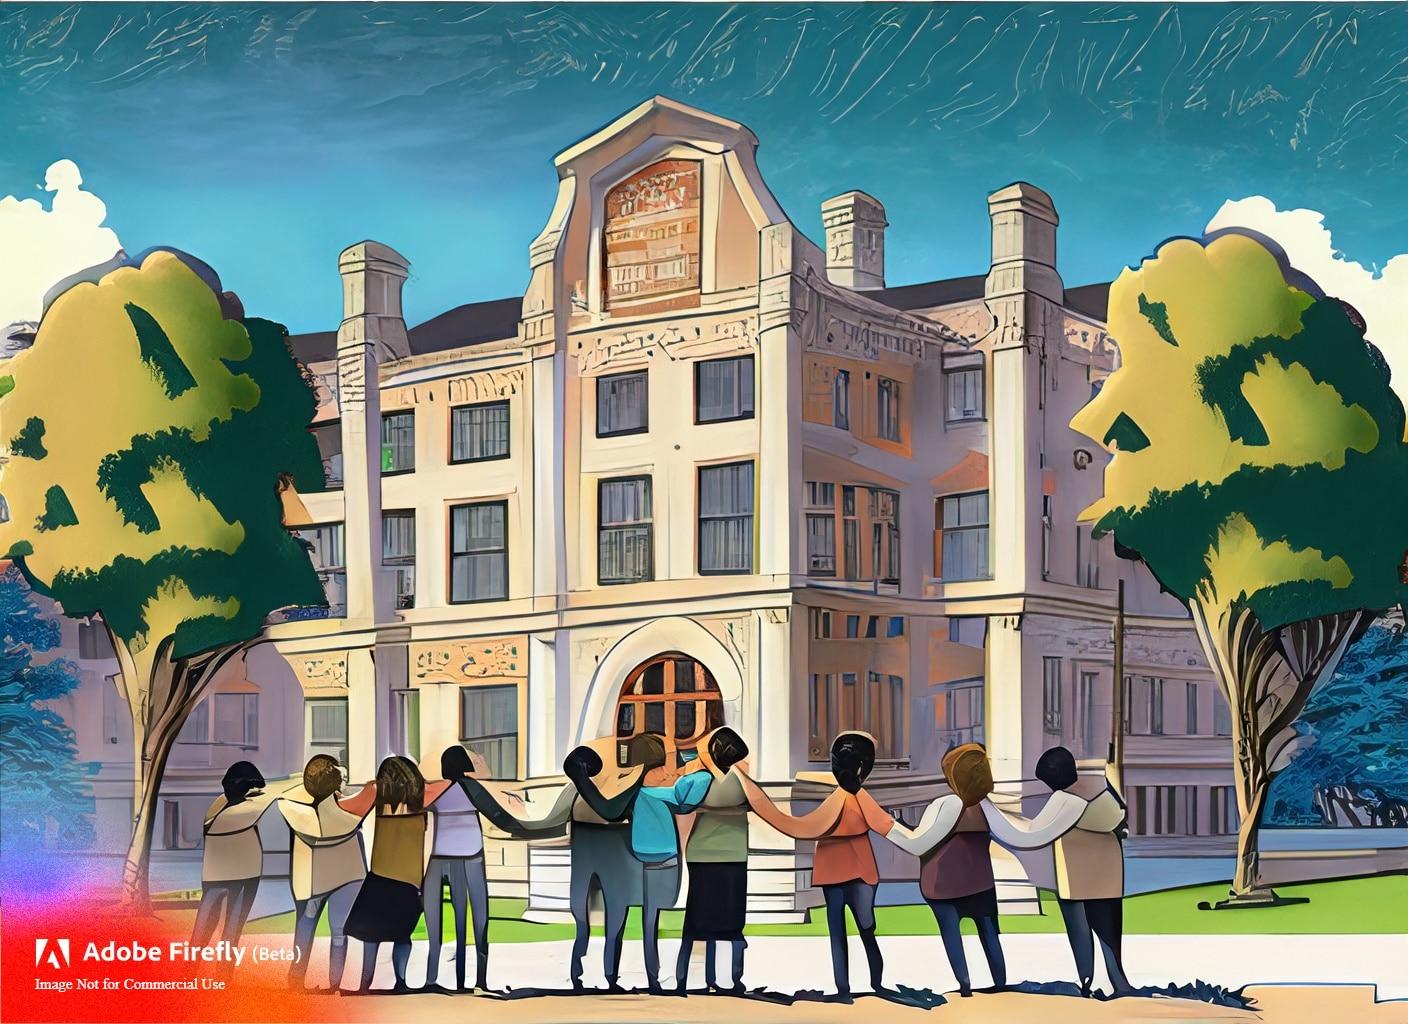 retention-rates-firefly-created-image; comic style image with diverse student body standing in front of large academic building